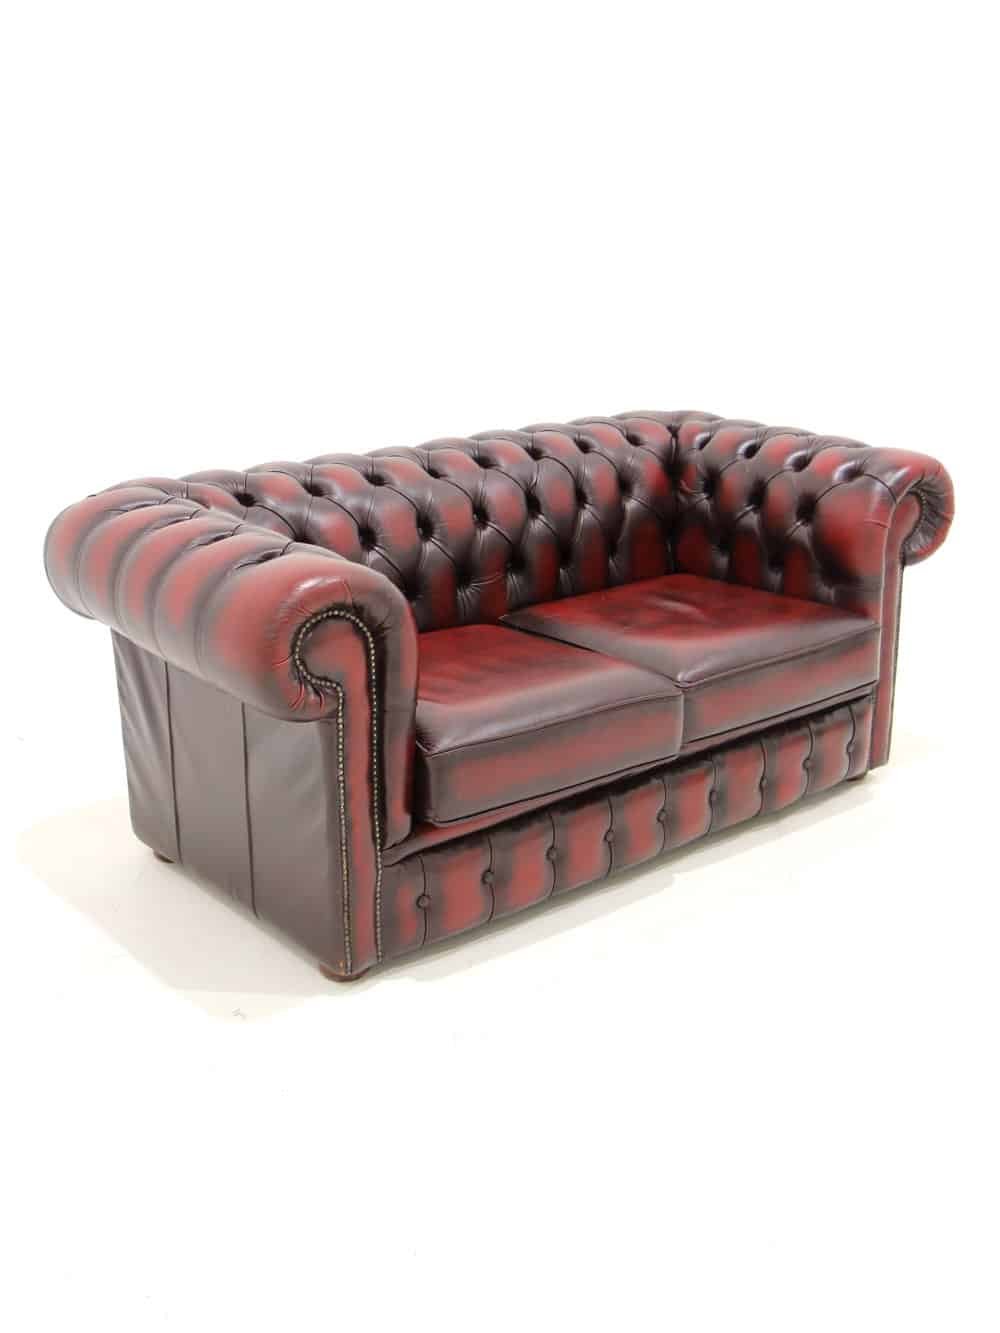 Antique Oxblood Chesterfield Sofa Two